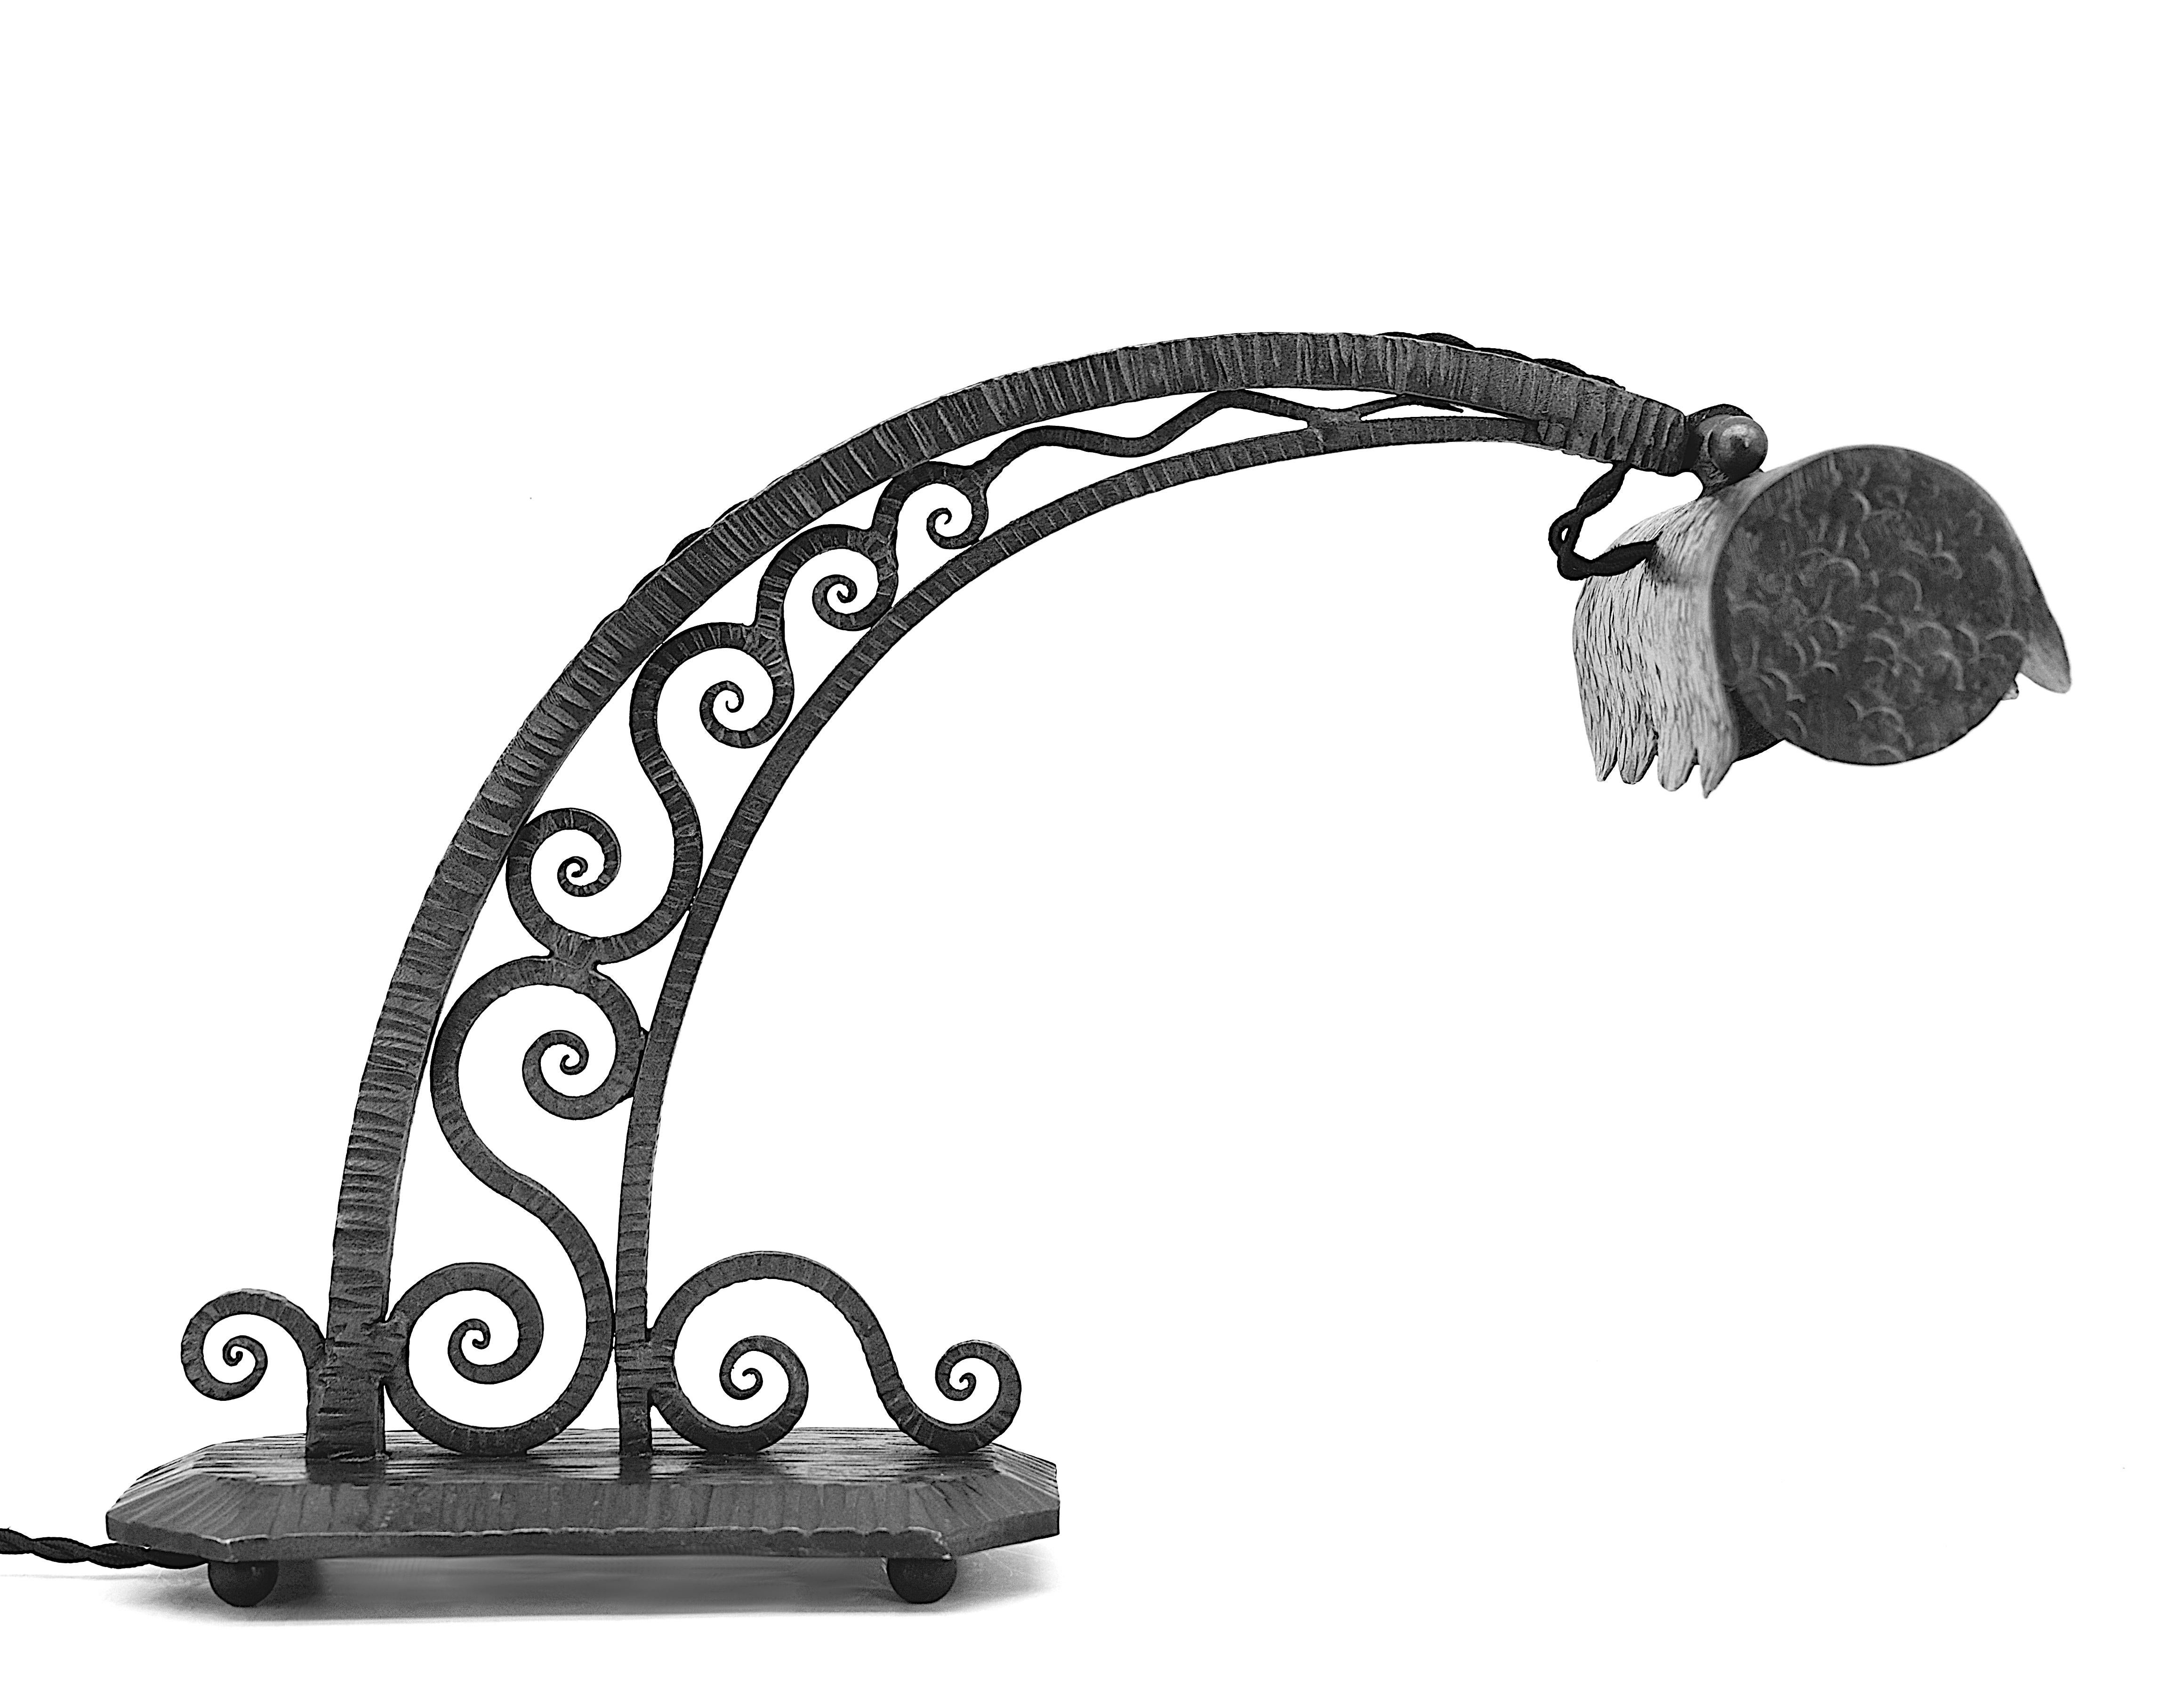 French Art Deco piano / desk / table lamp by Le Fer Forge (Lyon), France, 1920s. Wrought-iron. Measures: height: 9.8